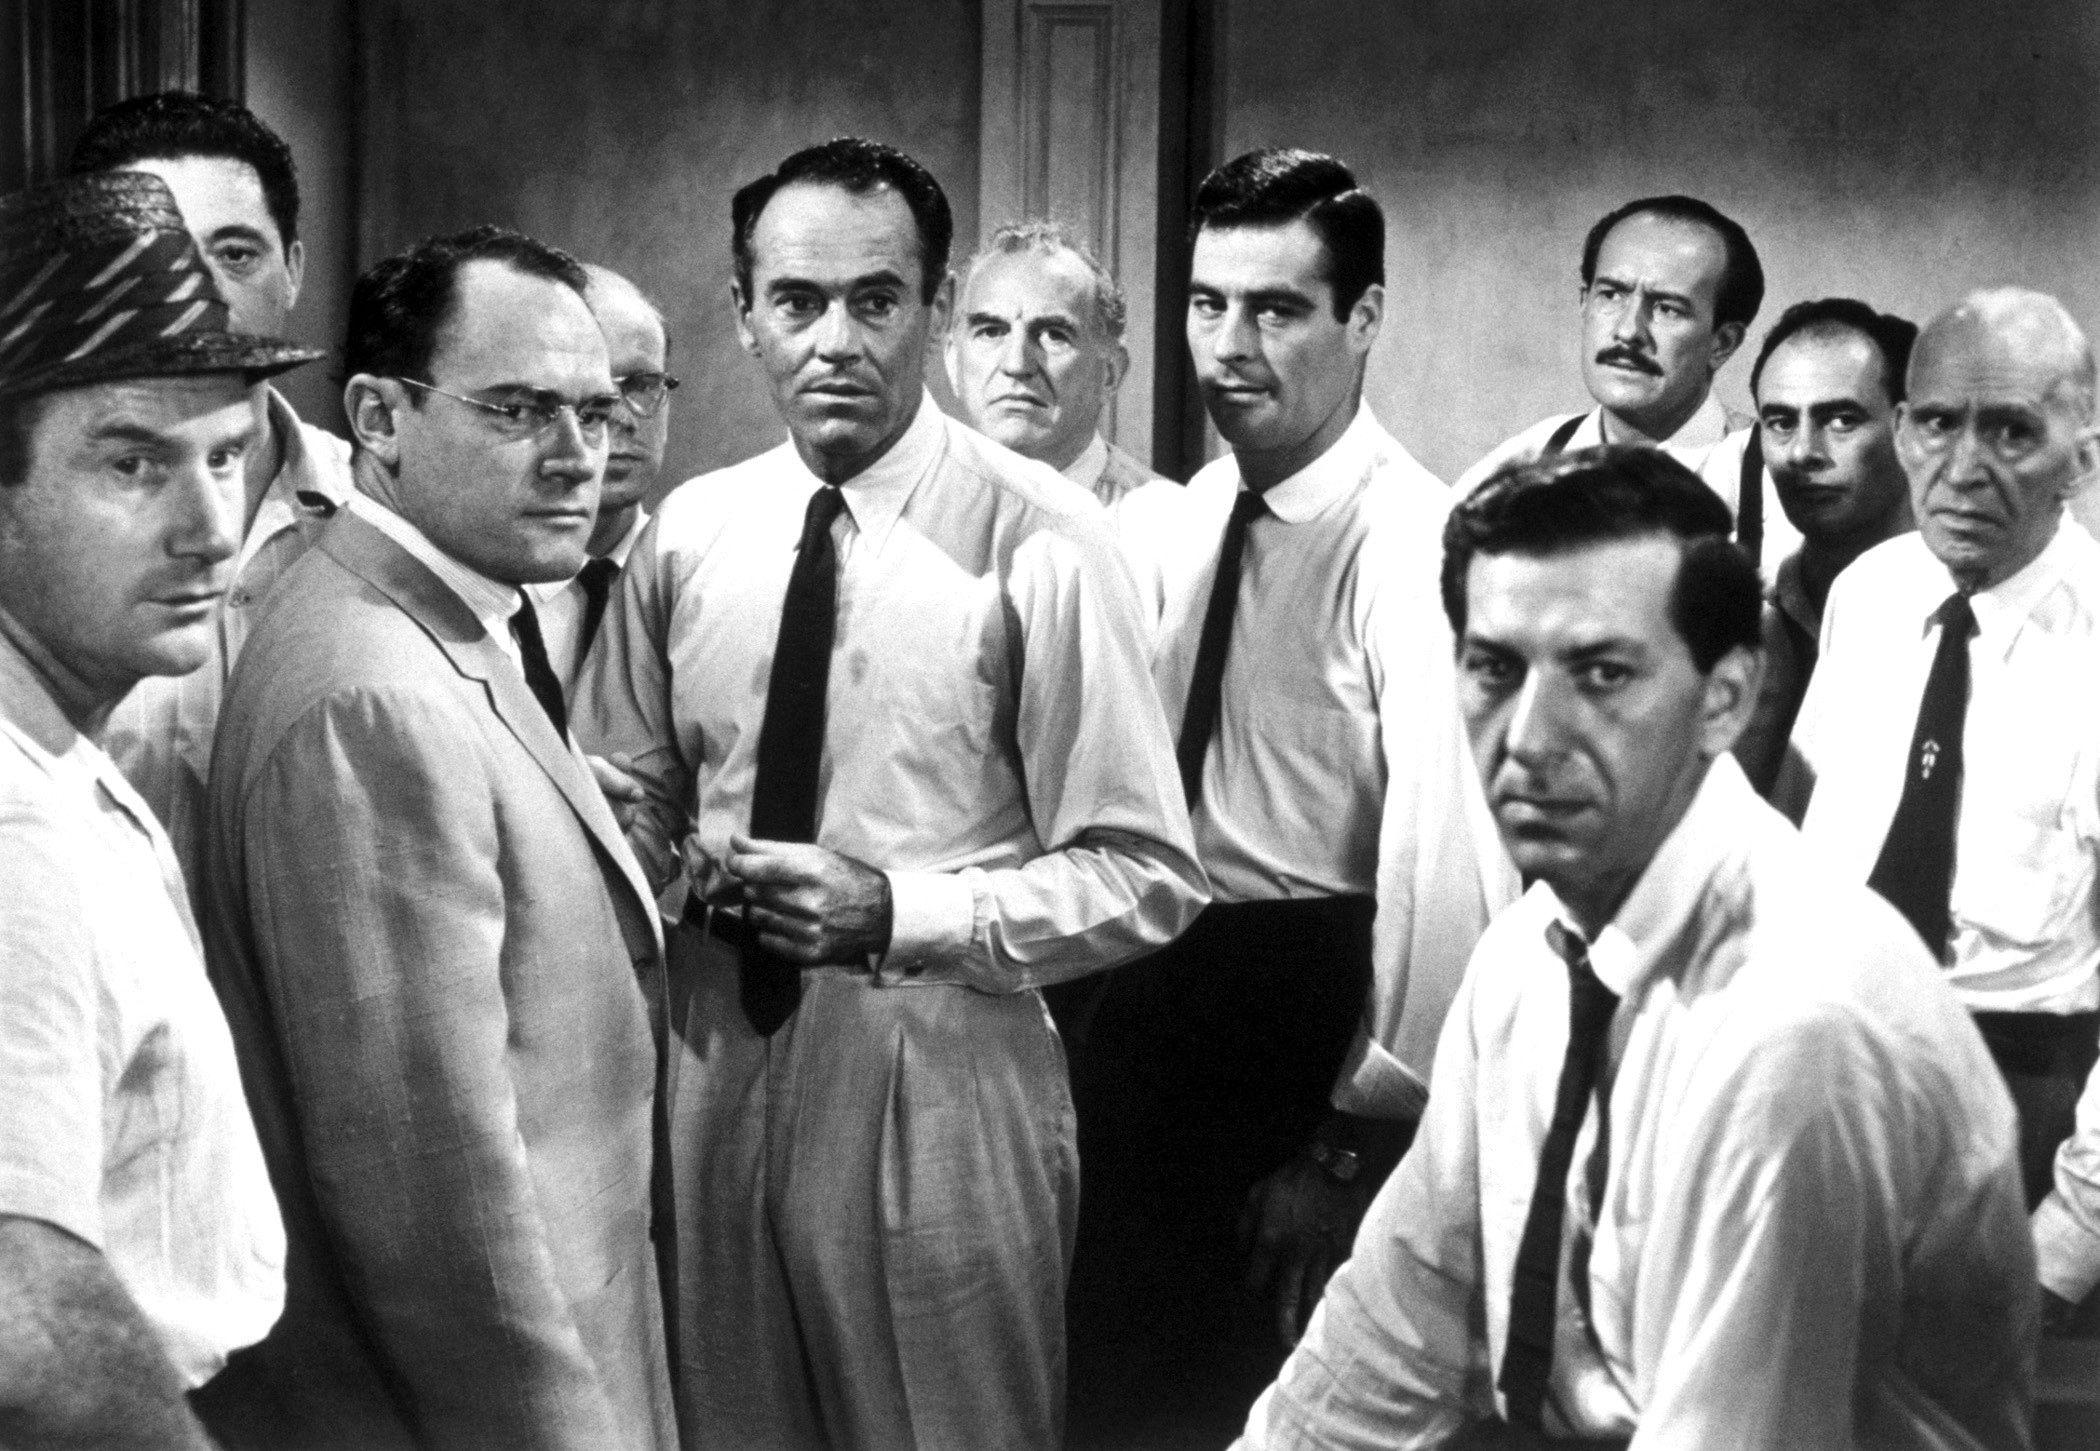 2100x1451px 960.74 KB 12 Angry Men